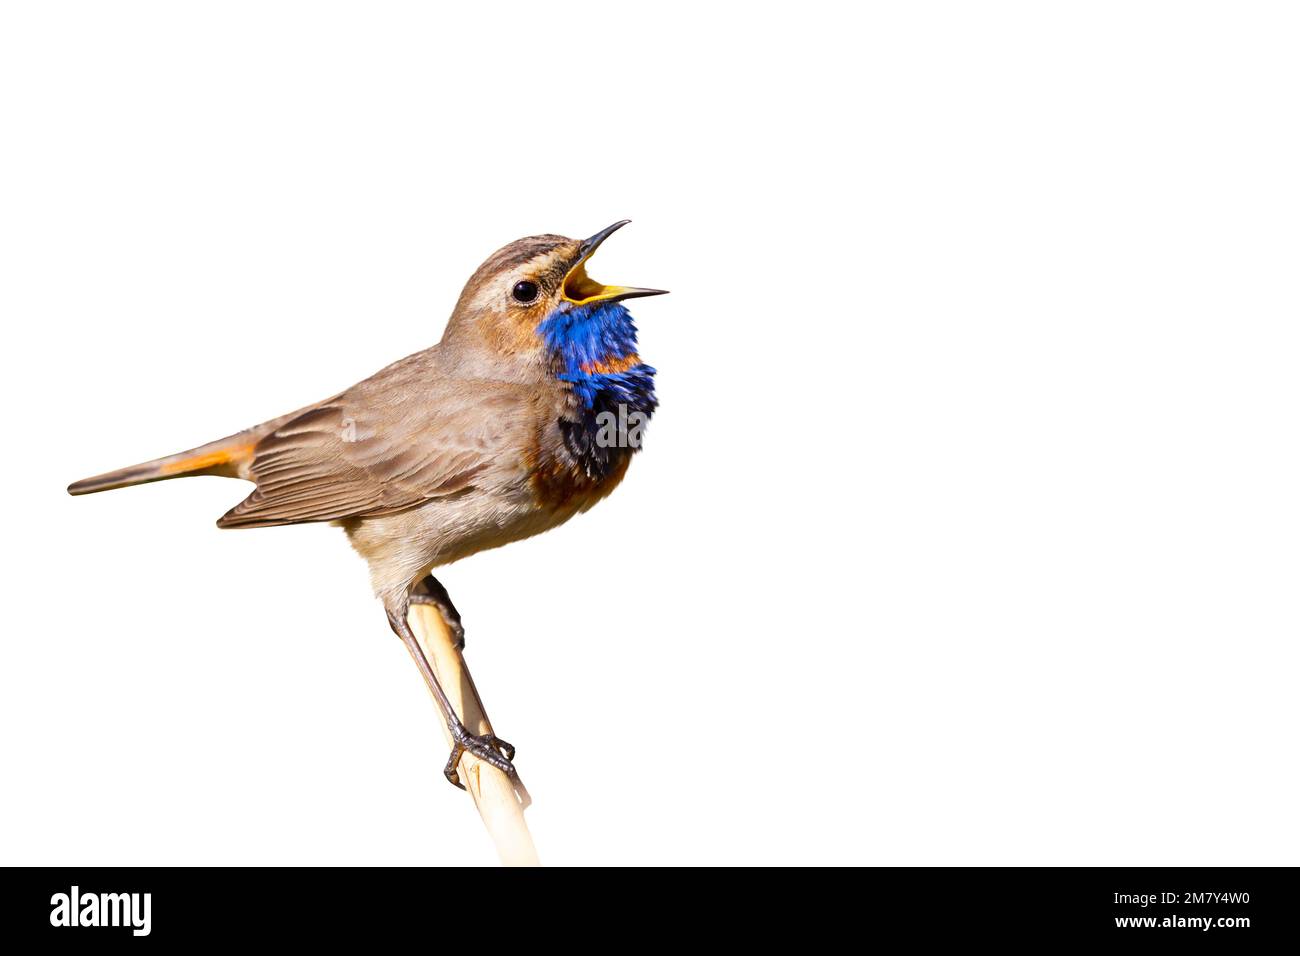 bluethroat singing a song with its beak open isolate on white Stock Photo